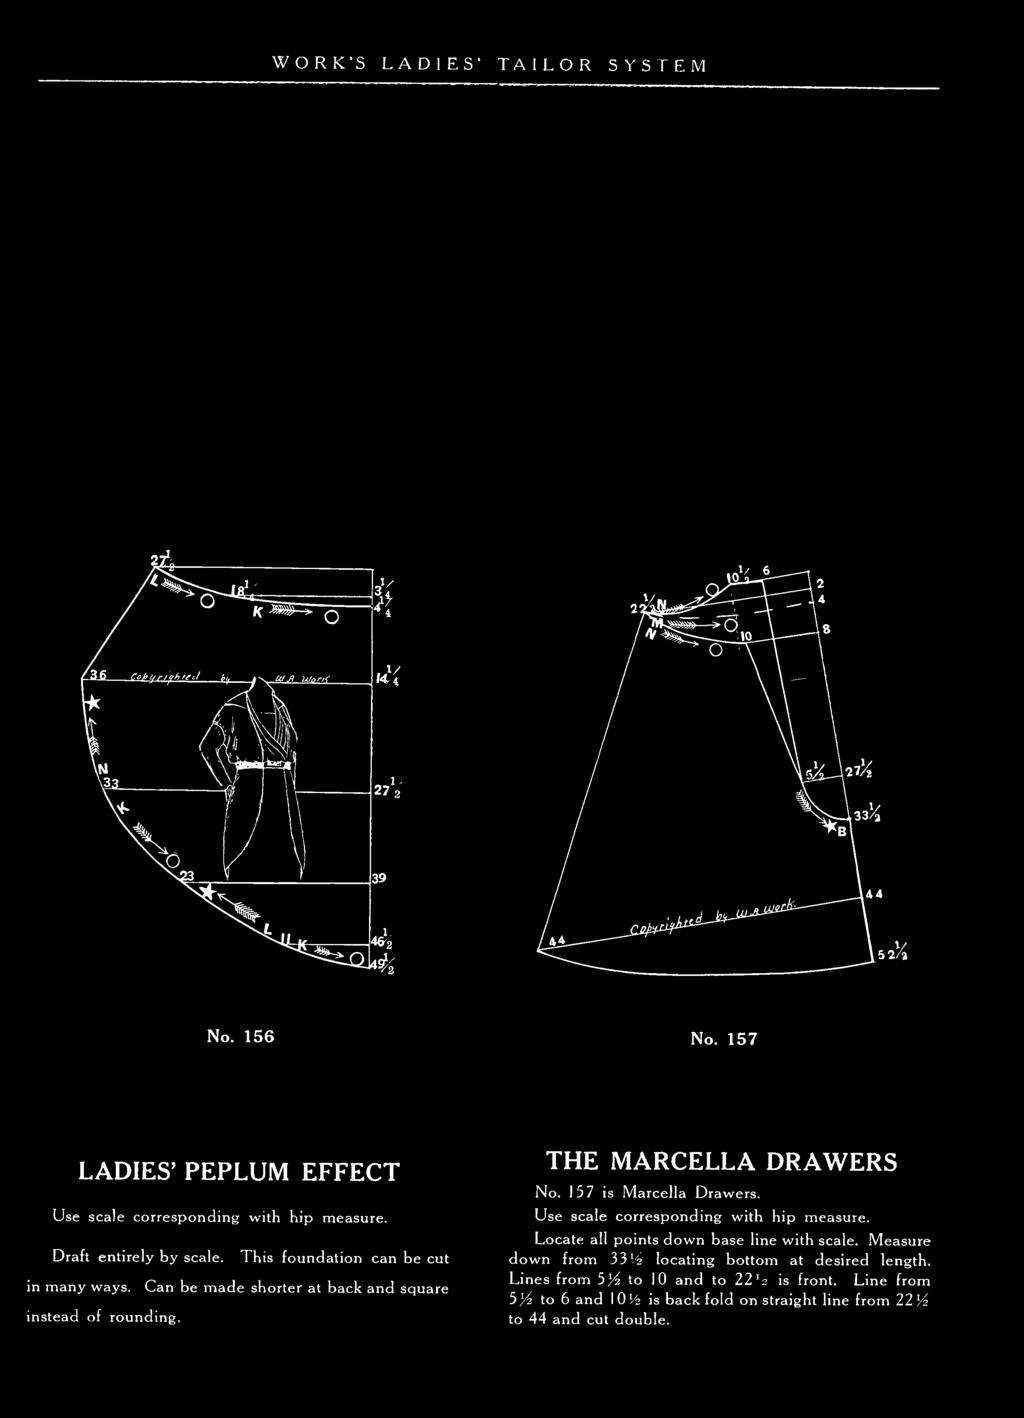 157 is Marcella Drawers. Use scale corresponding with hip measure. Locate all points down base line with scale.